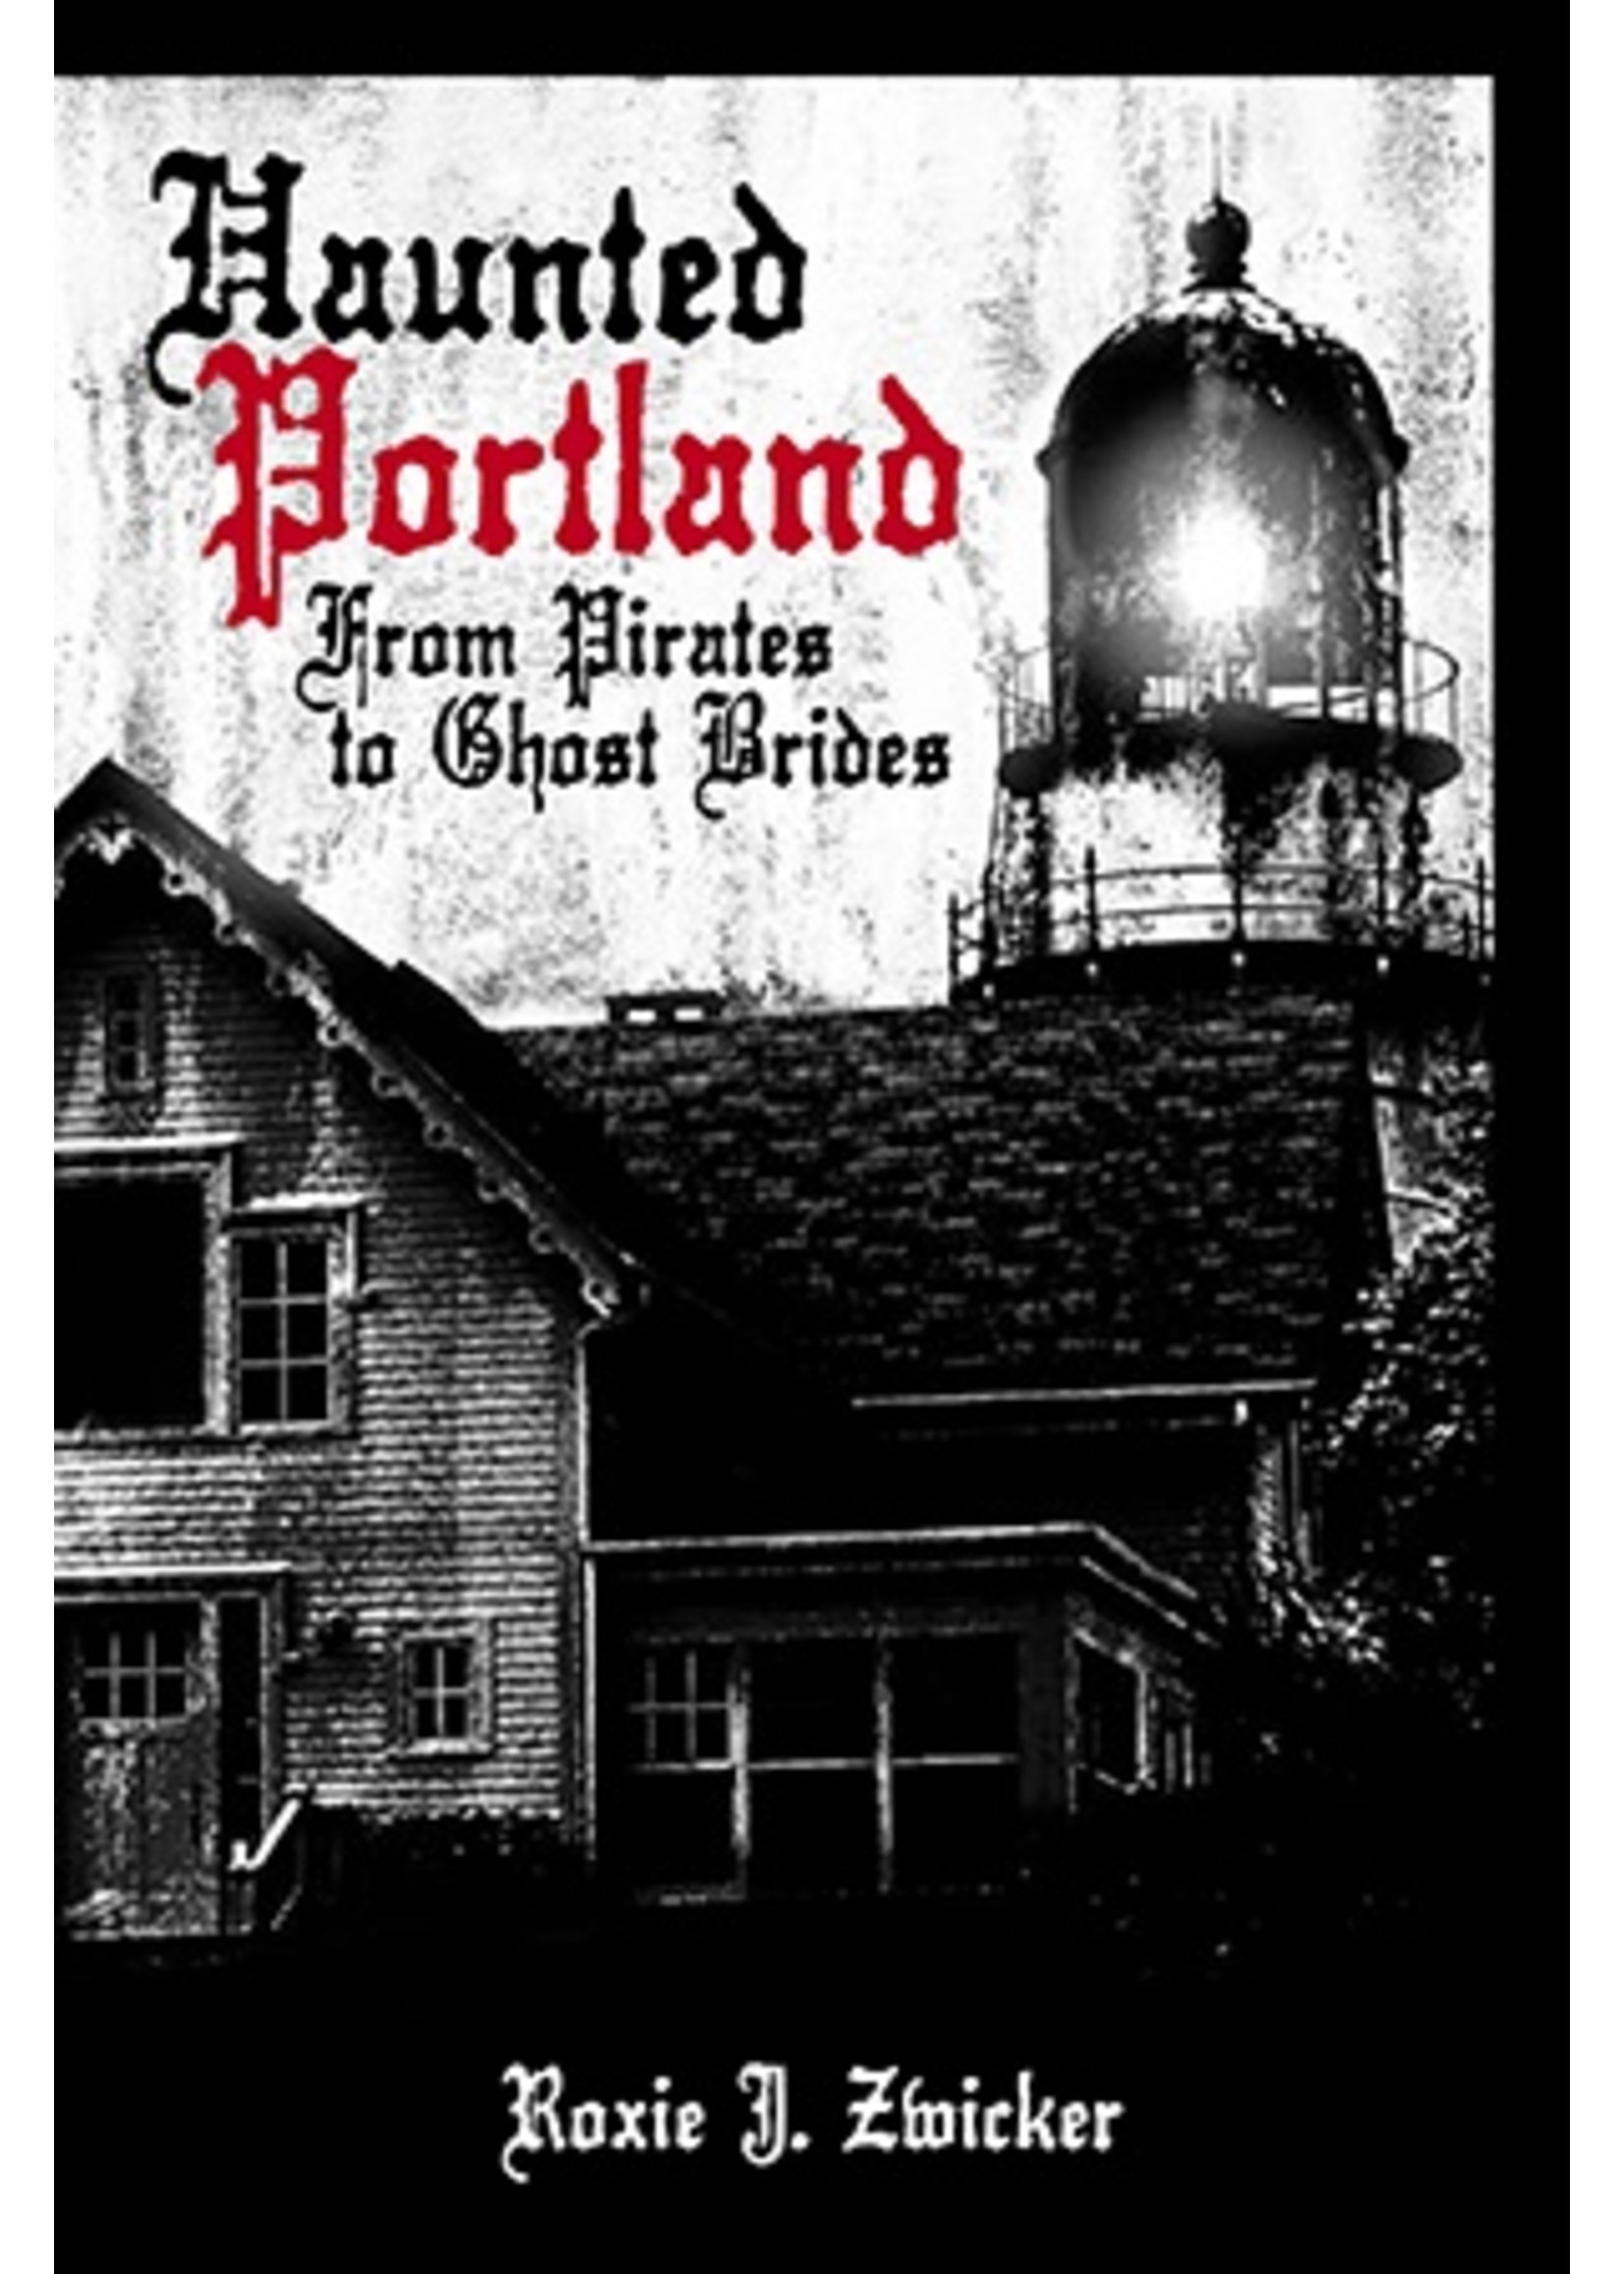 Haunted America Haunted Portland - From Pirates to Ghost Brides